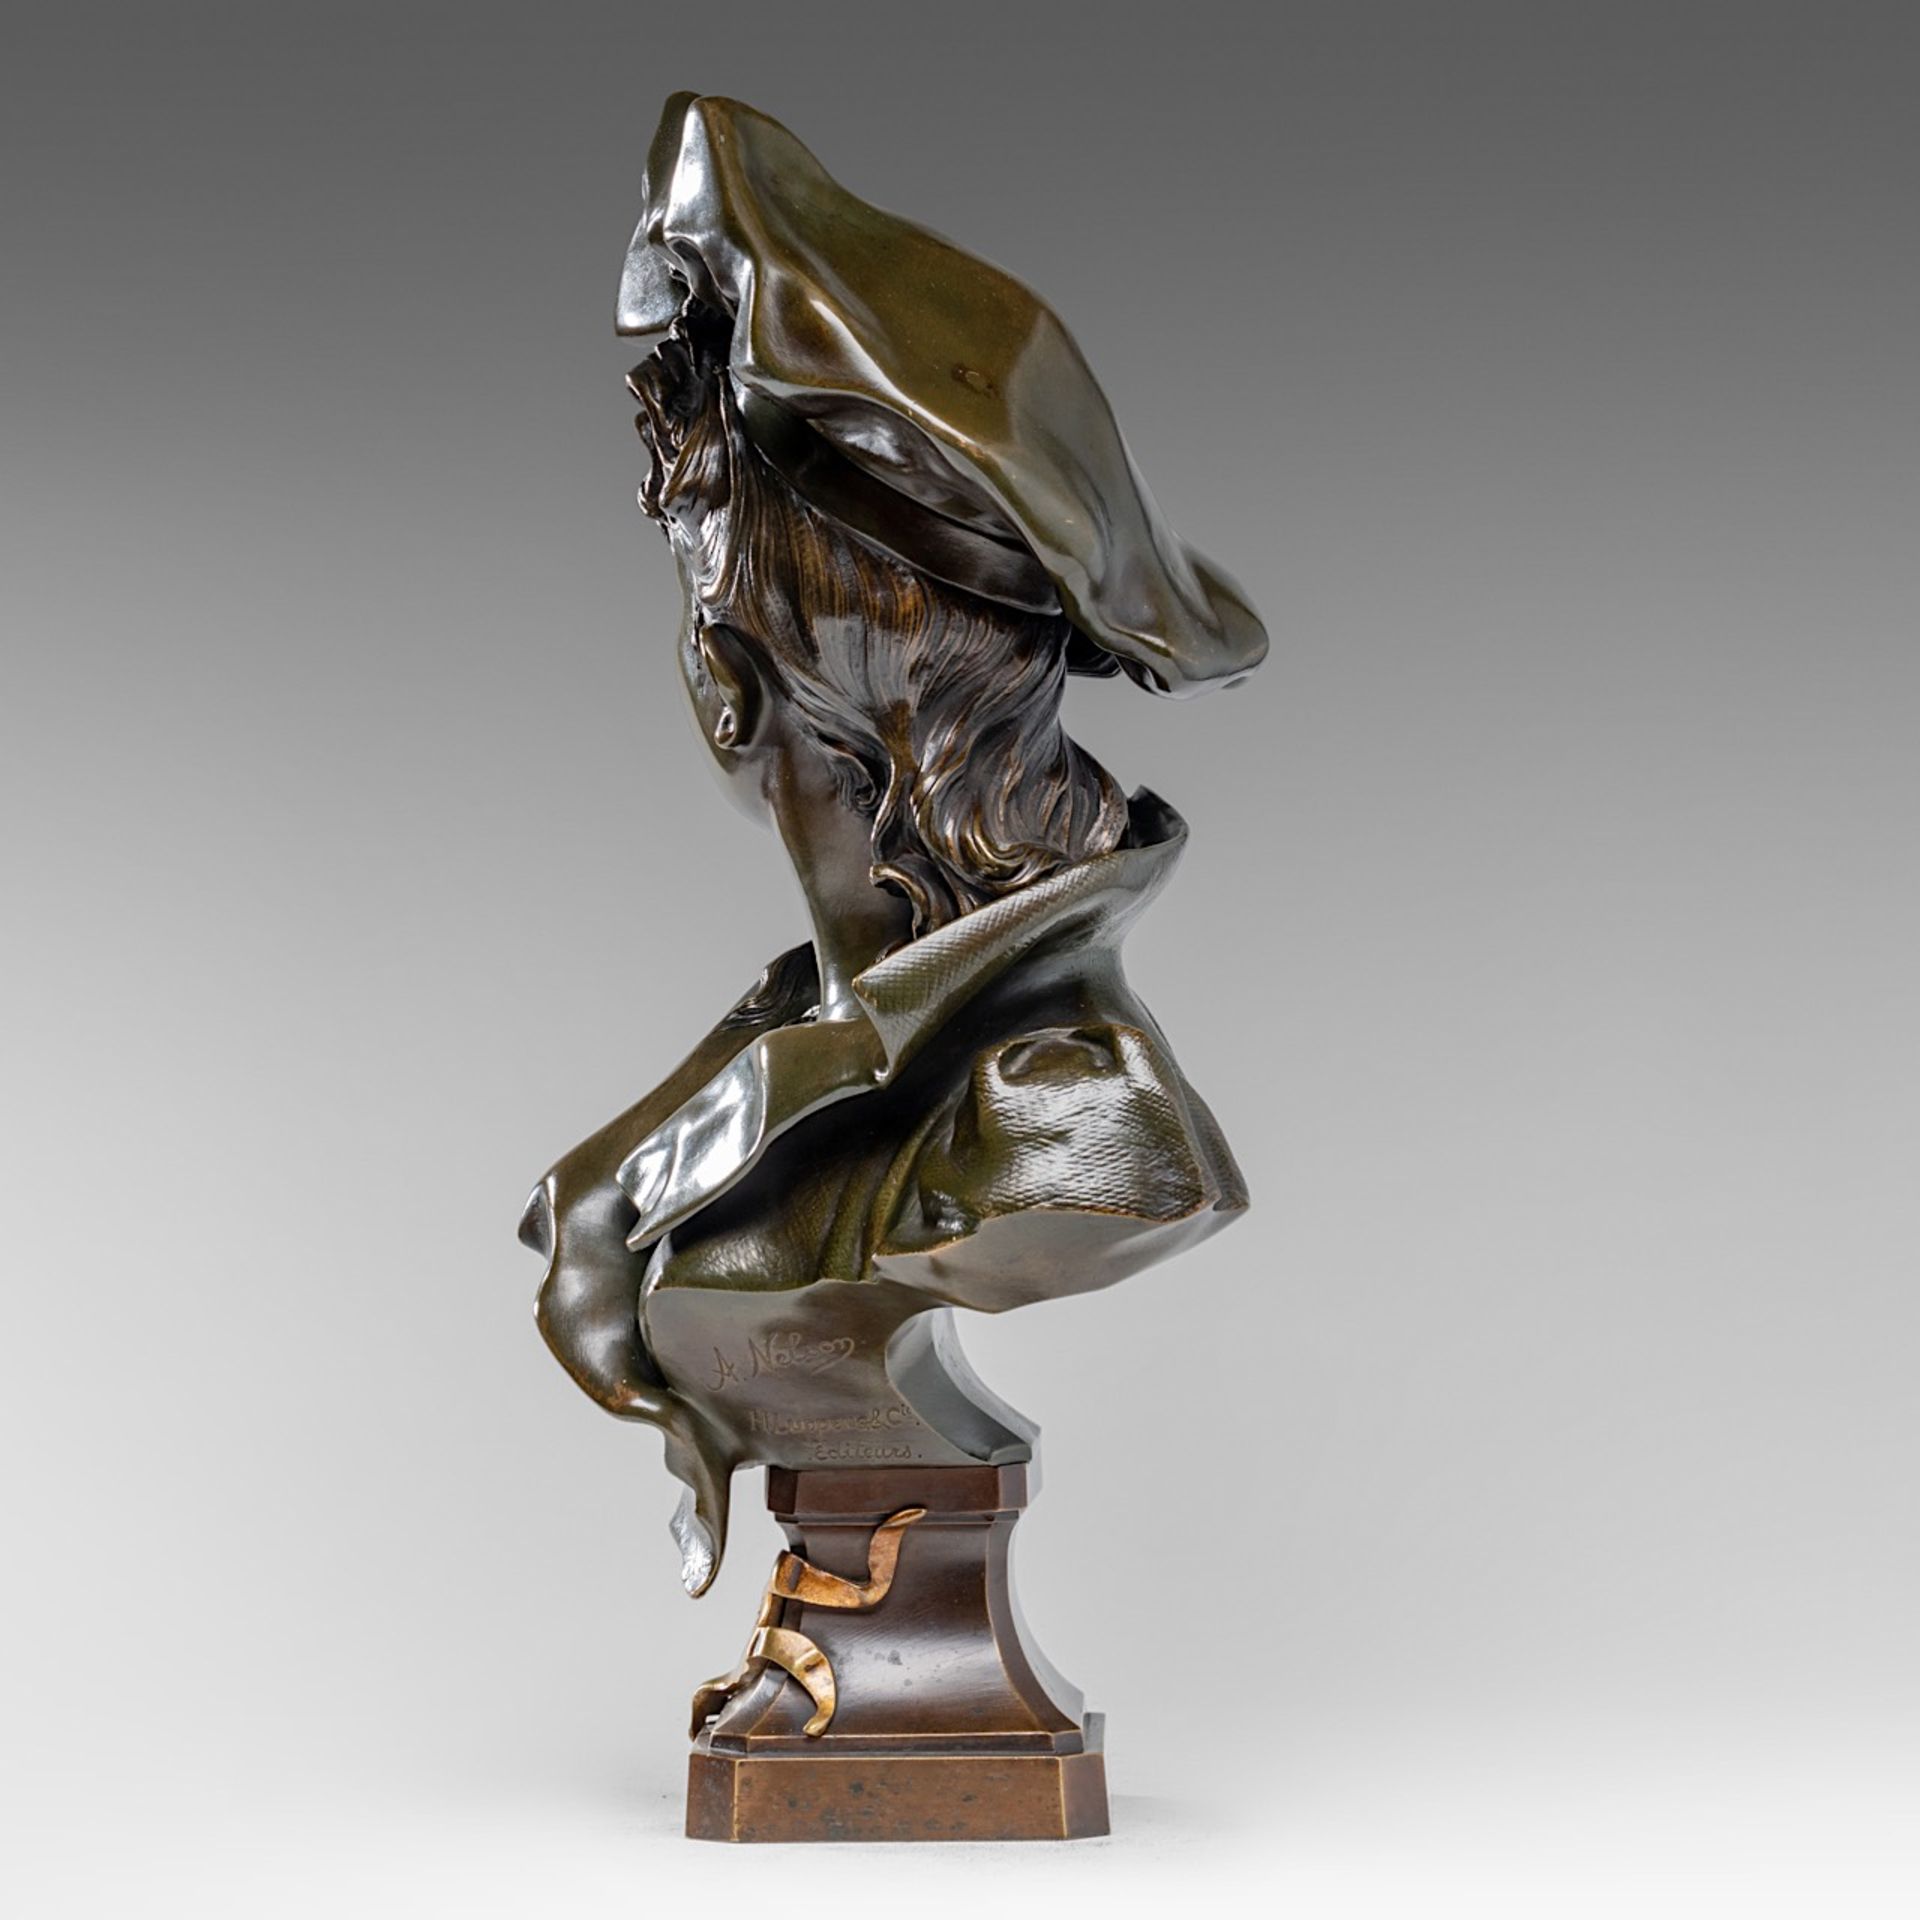 Anton Nelson (1849-1910), 'Fantasia', green patinated bronze bust, H 48 cm - Image 4 of 11